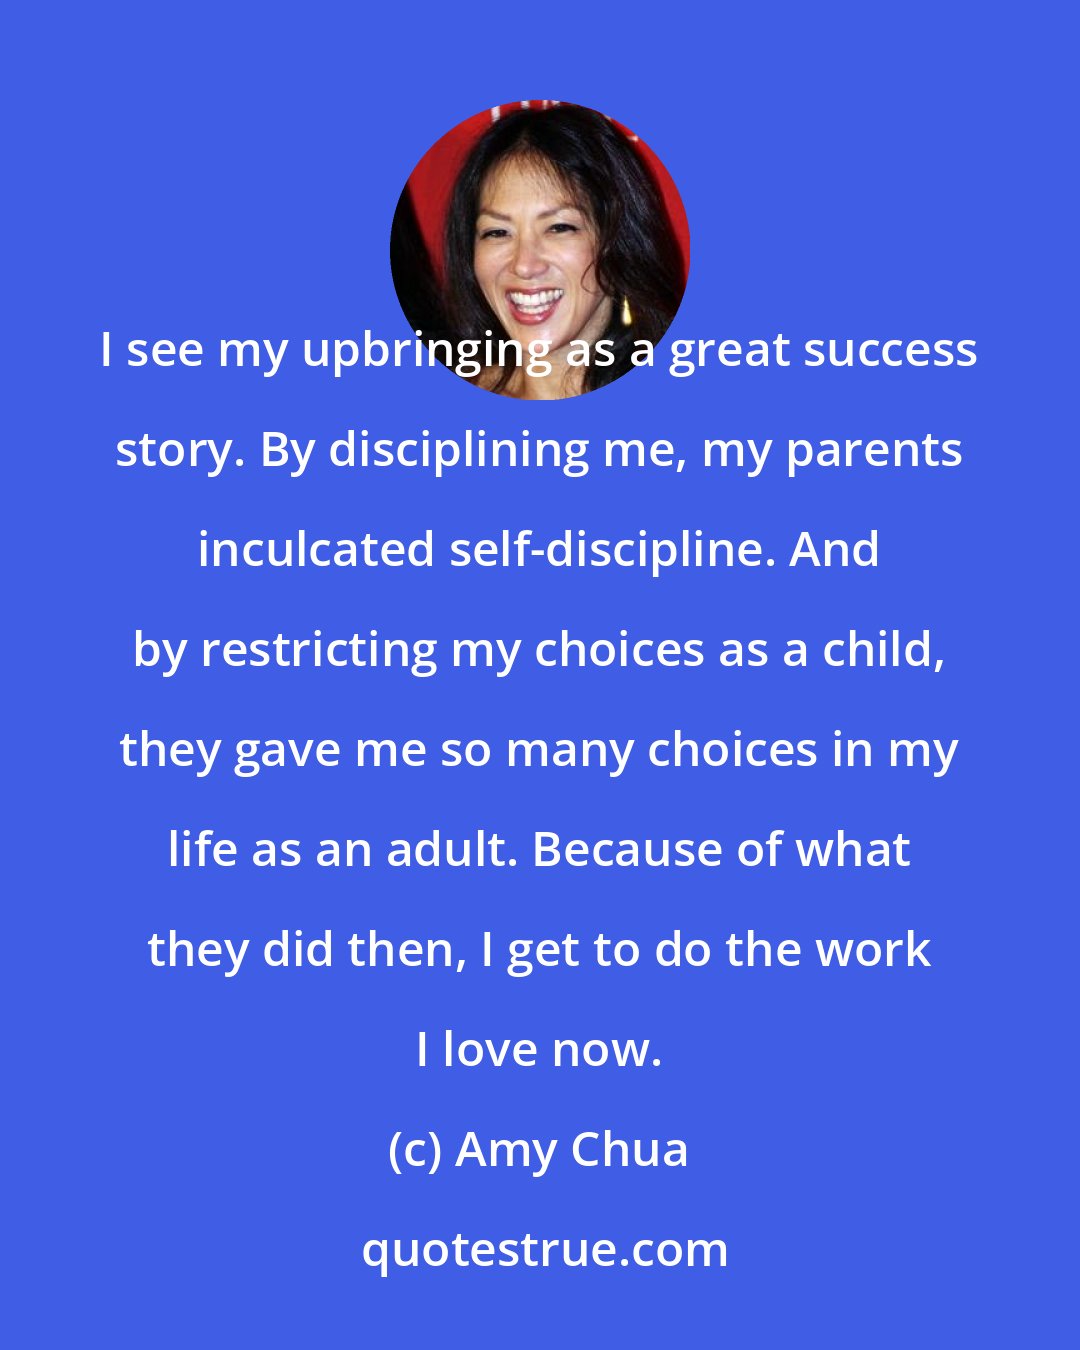 Amy Chua: I see my upbringing as a great success story. By disciplining me, my parents inculcated self-discipline. And by restricting my choices as a child, they gave me so many choices in my life as an adult. Because of what they did then, I get to do the work I love now.